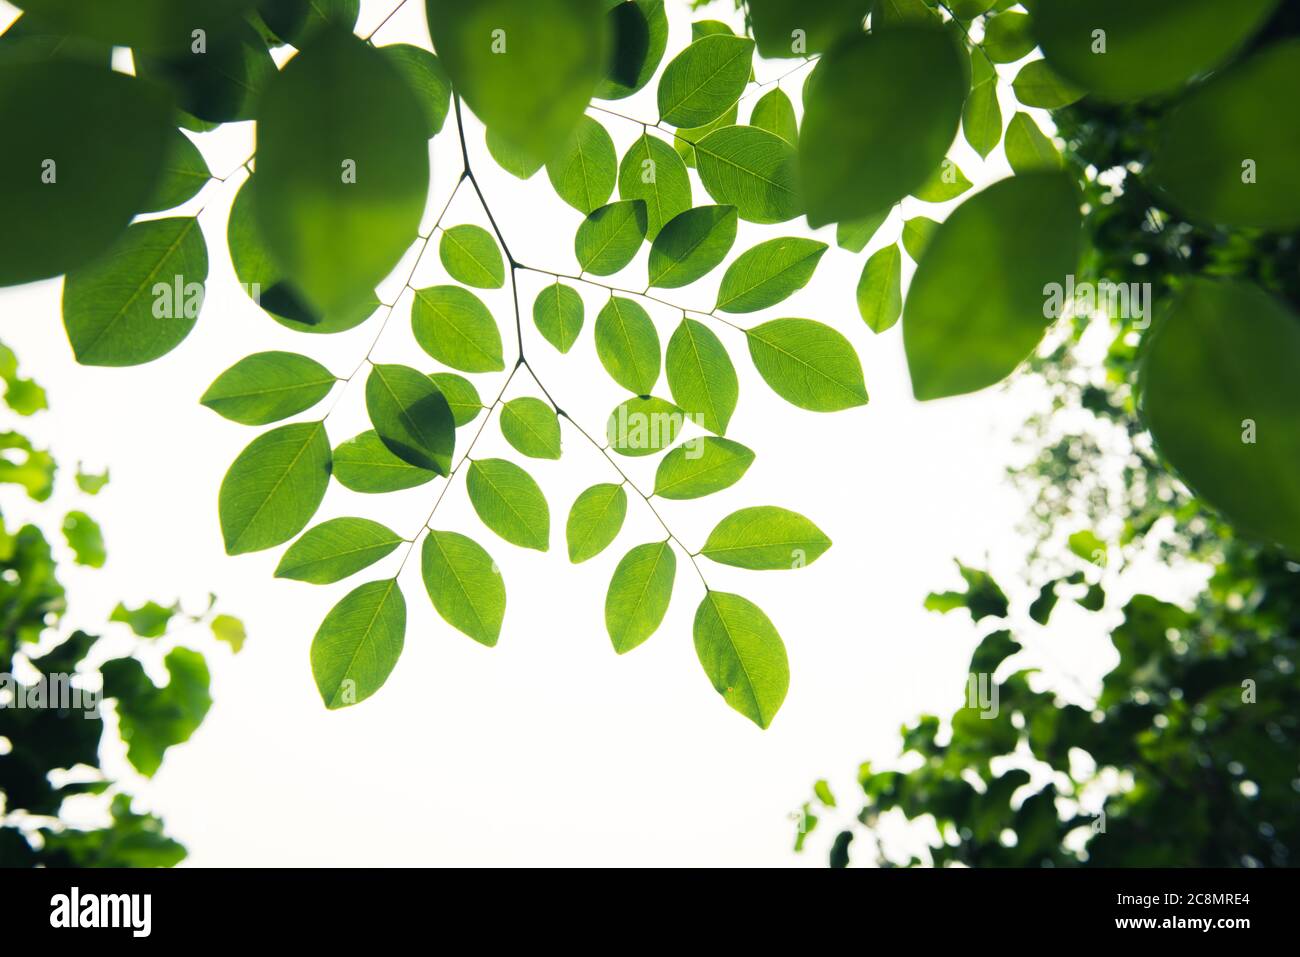 Green leaves isolated on white as an ornate panoramic nature border. Stock Photo